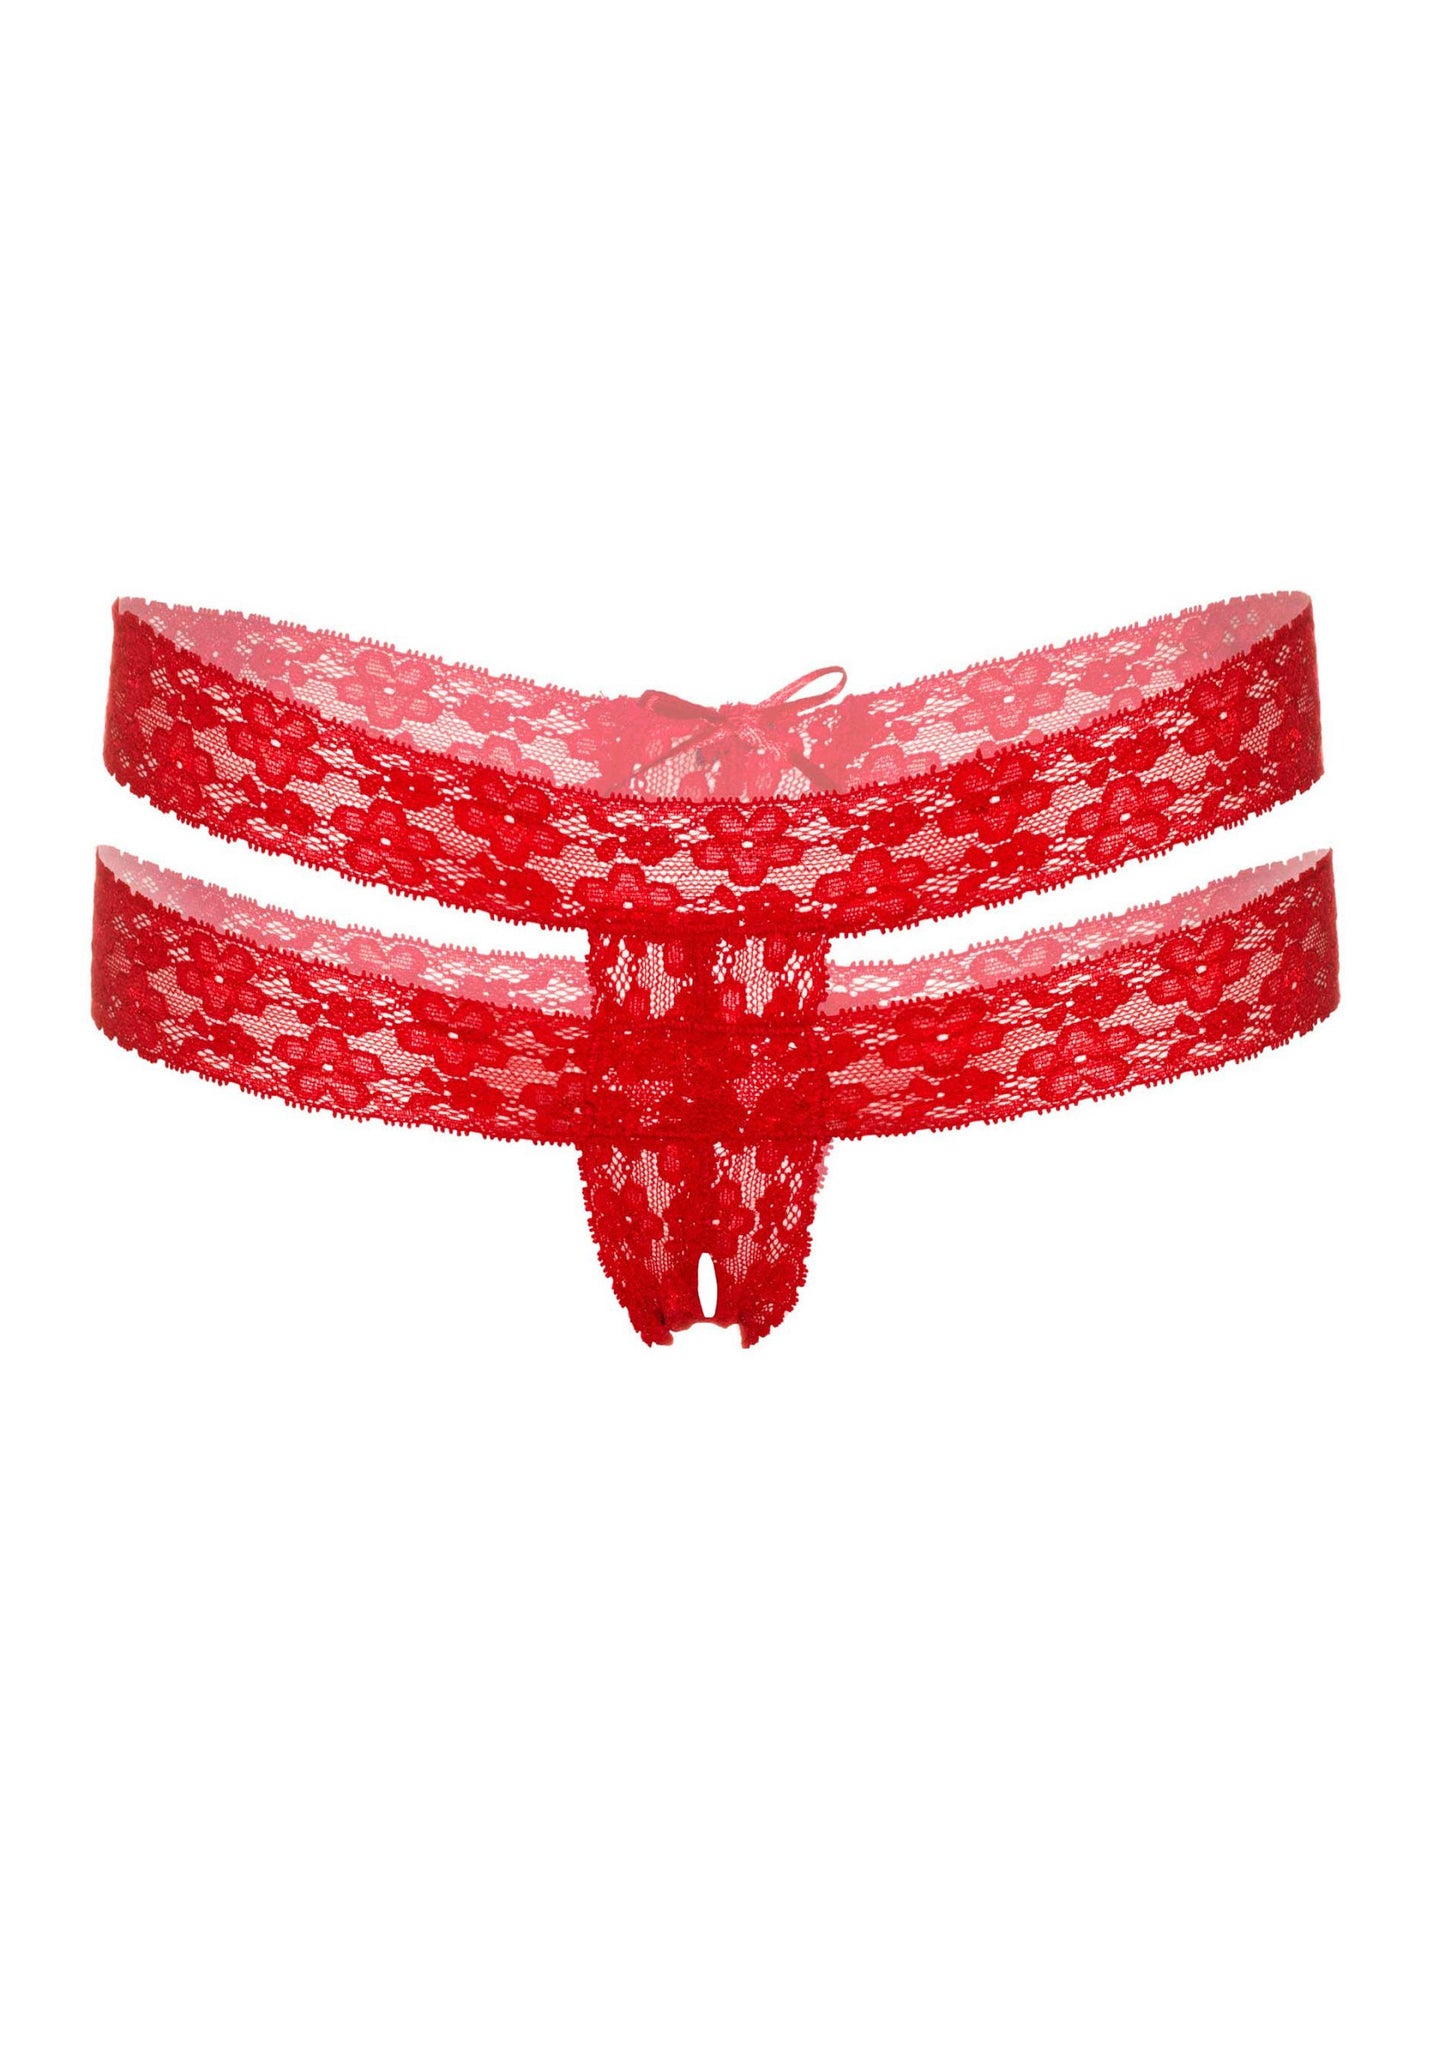 Daring Intimates Lucy crotchless thong panty RED S/M - 1